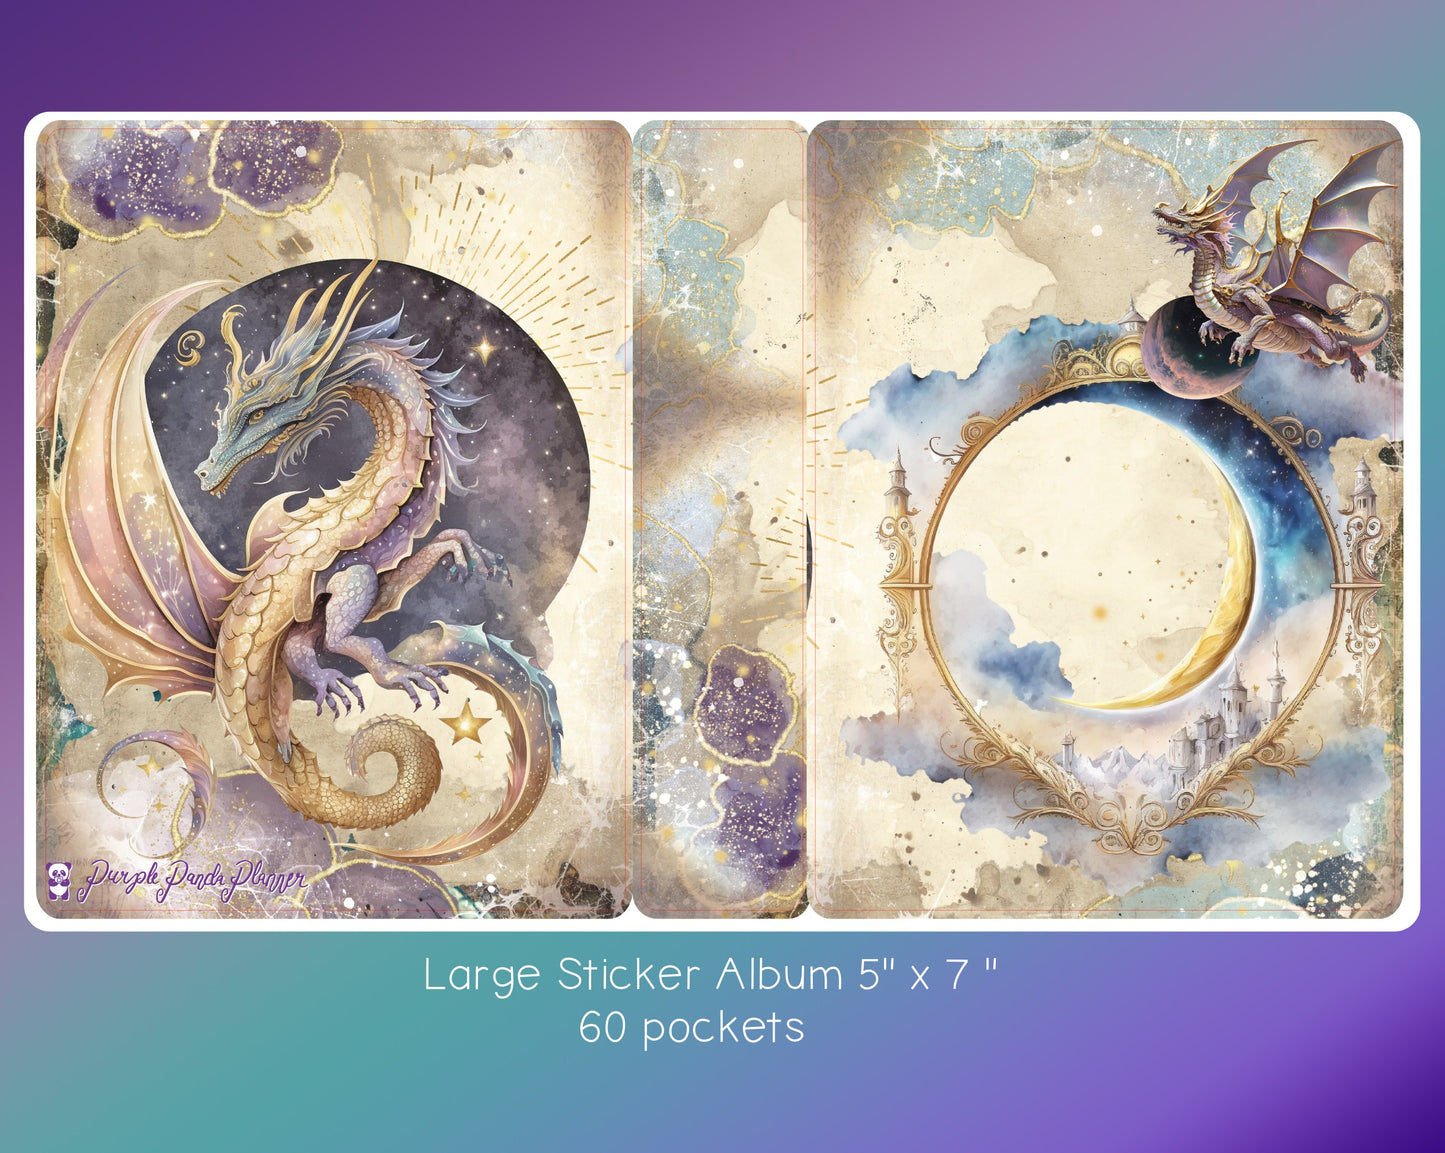 Large Sticker Album (5" x 7") - Celestial Dragons Cover with Holo Laminate Overlay